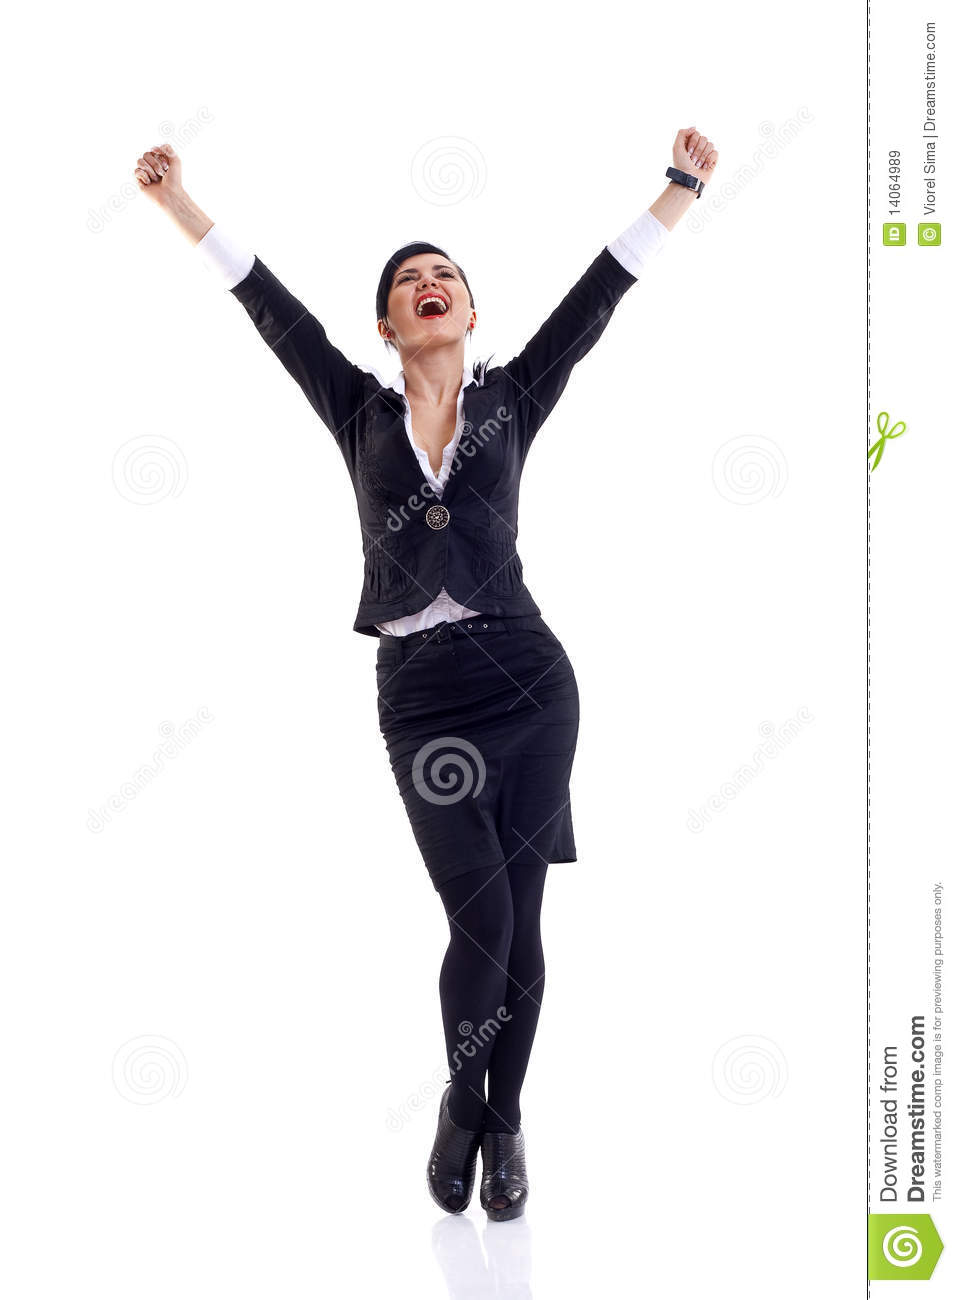 More Similar Stock Images Of   We Have A Winner   